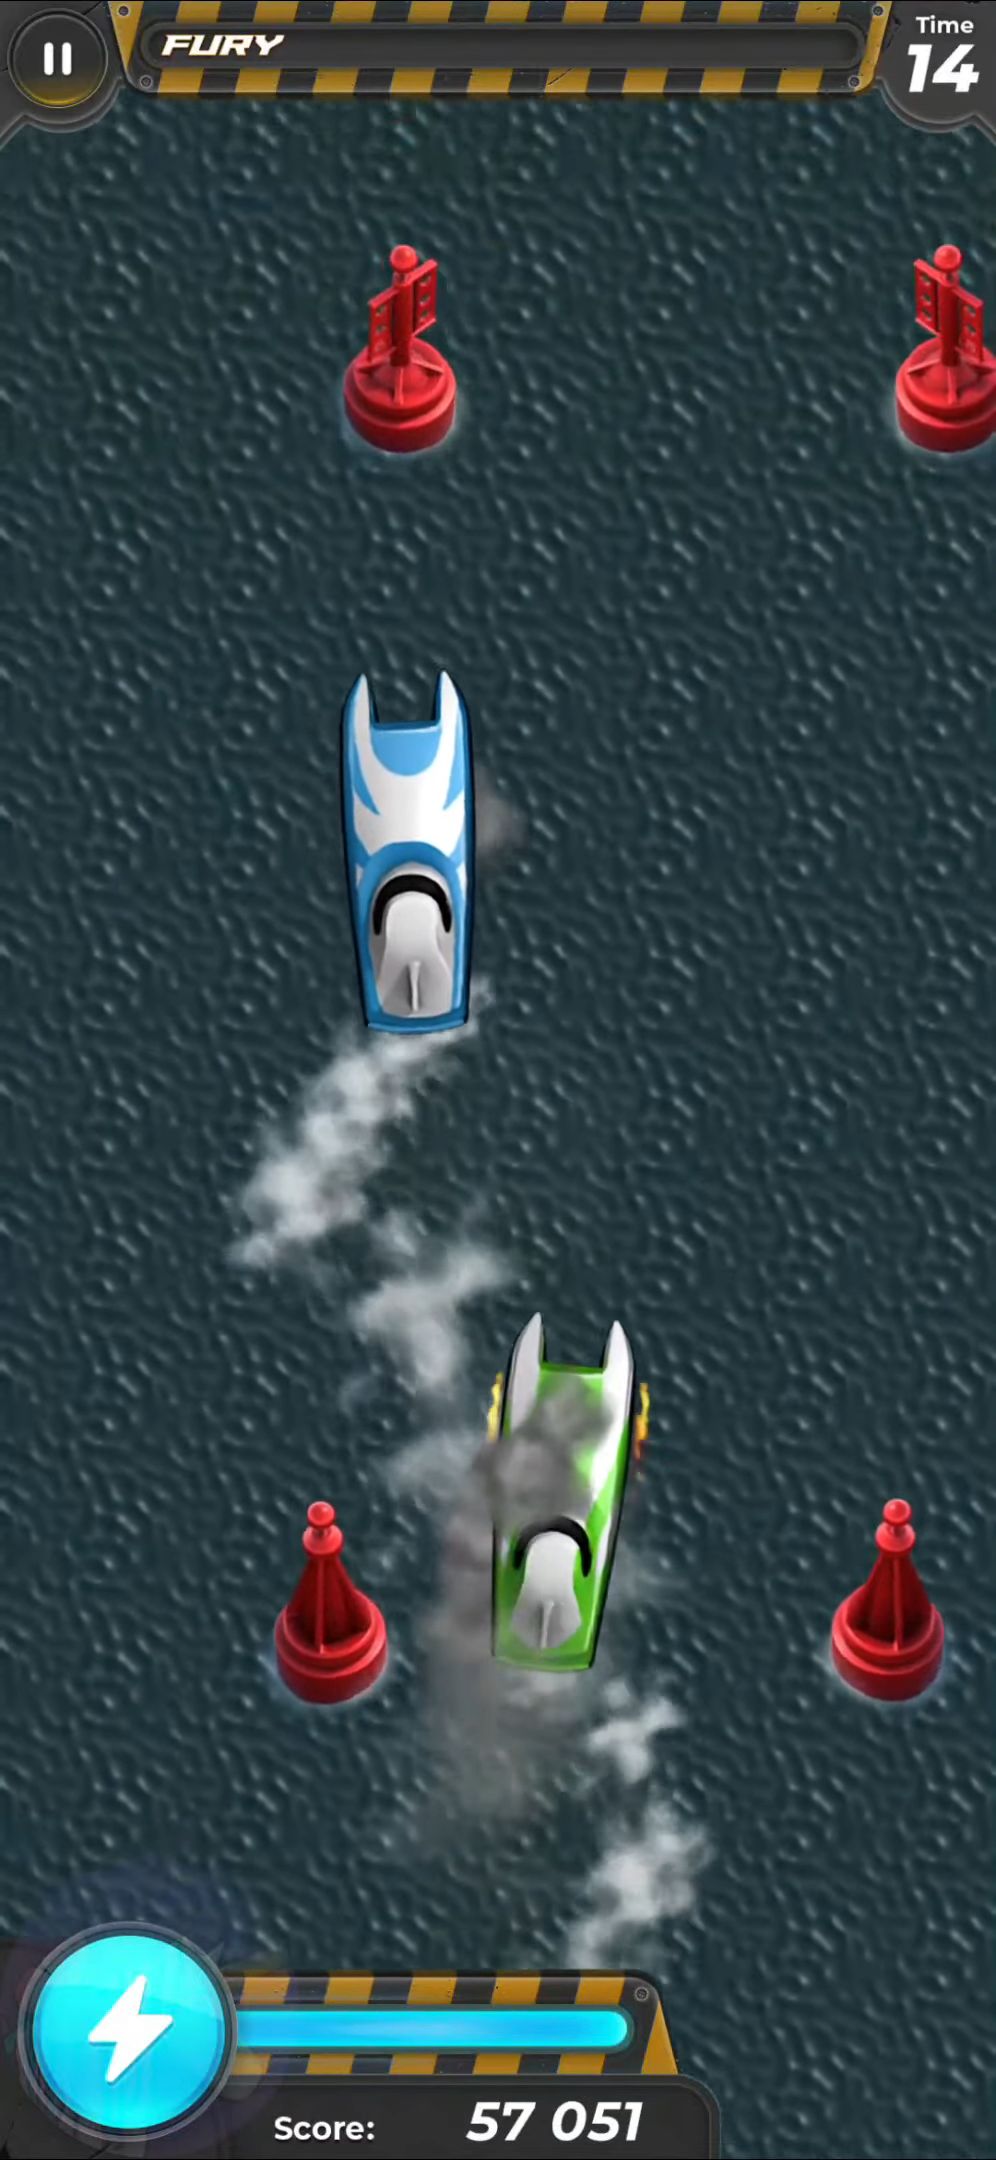 Freeway Fury: Alien Annihilation for Android